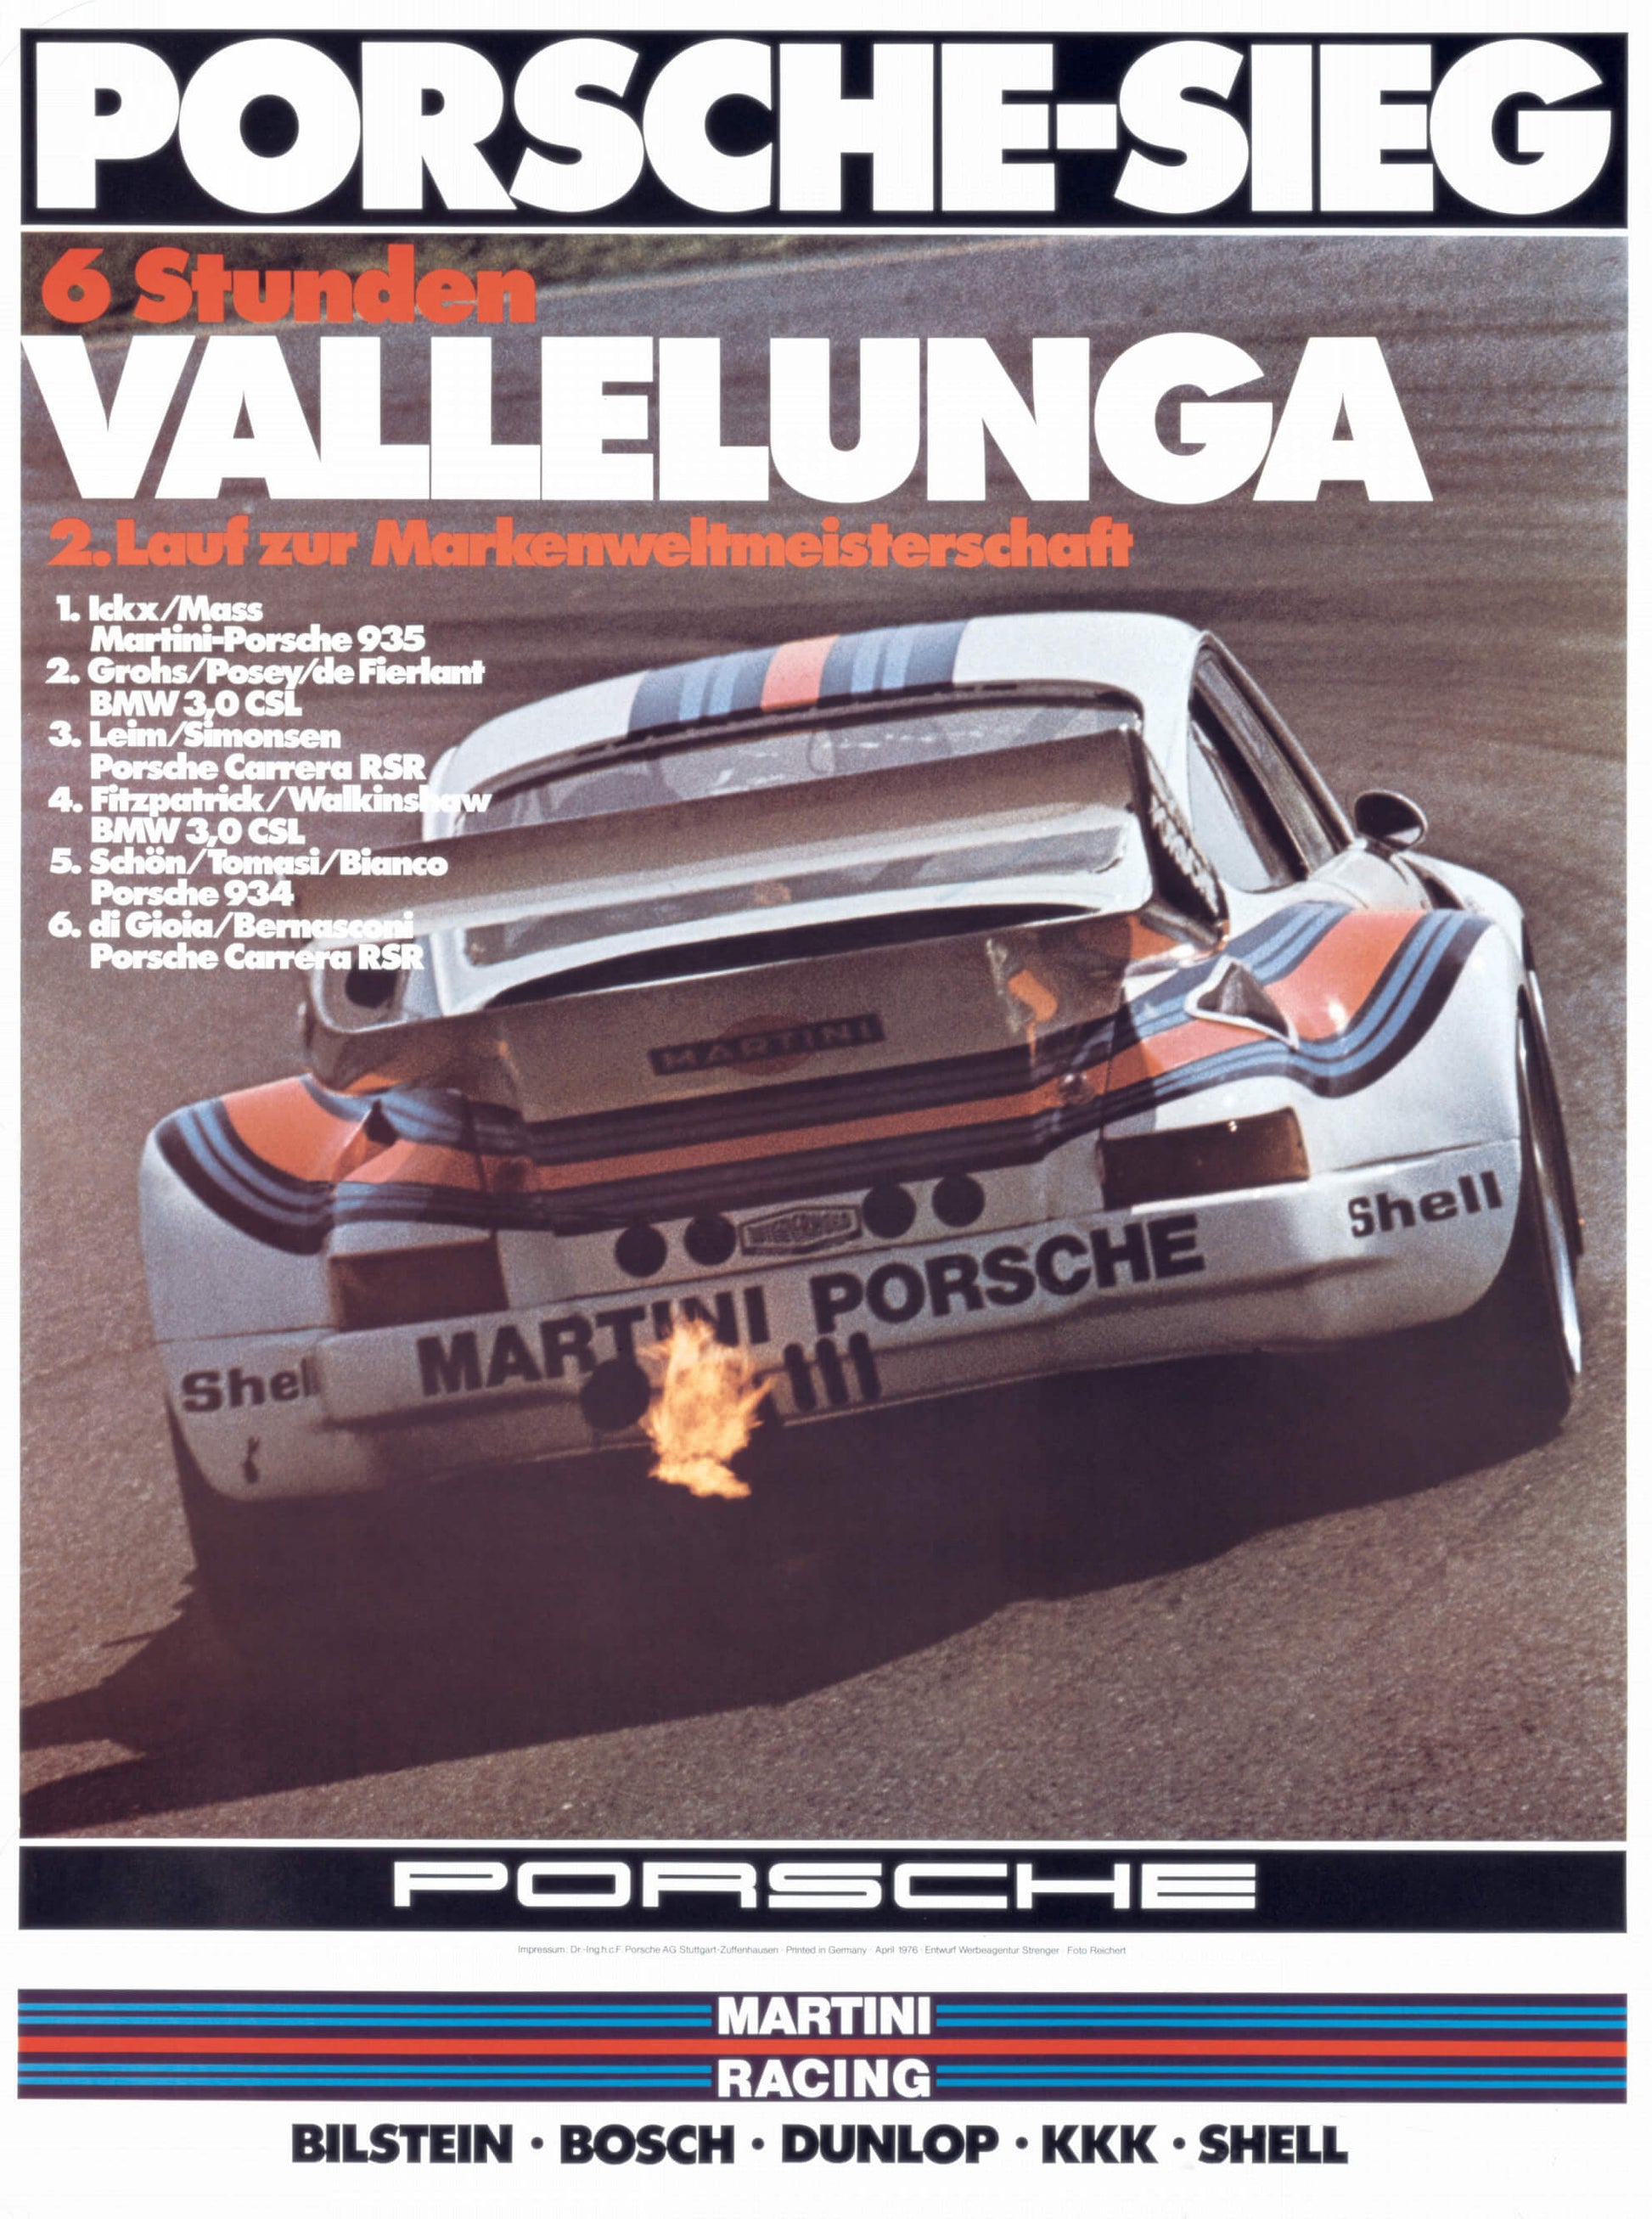 Porsche 935 Vallelunga Victory: A Vintage Racing Poster Tribute